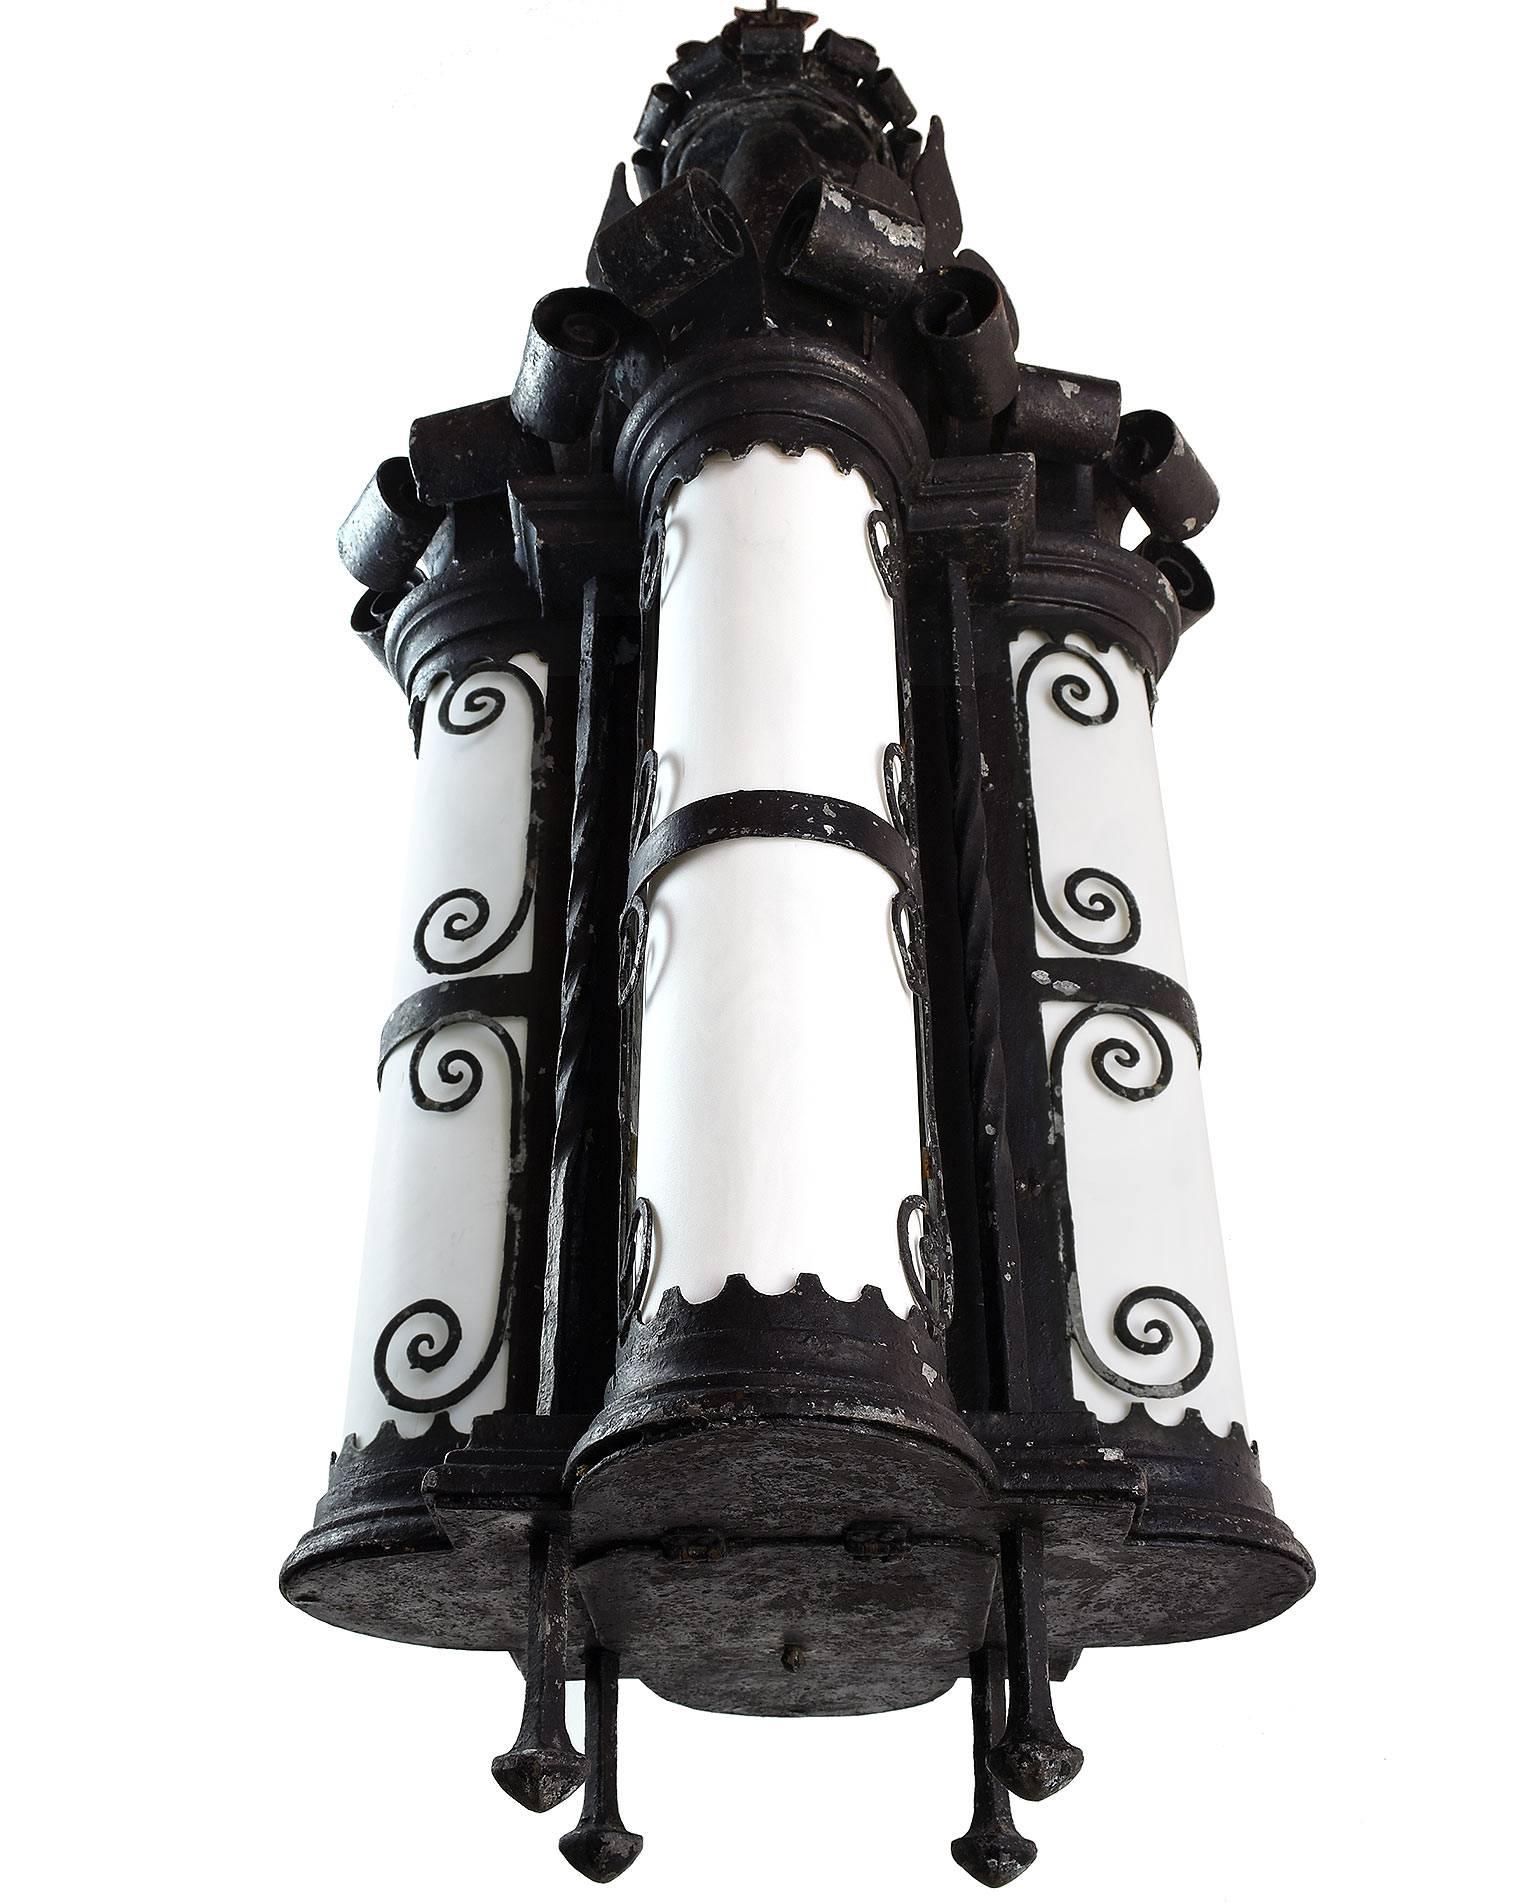 This large iron Gothic pendant is a complex combination of materials and shapes! The white opaque bent glass panels highlight the stunning silhouettes of the multiple ornaments, including fleur-de-lis, scrolls and castellations. A quatrefoil shape